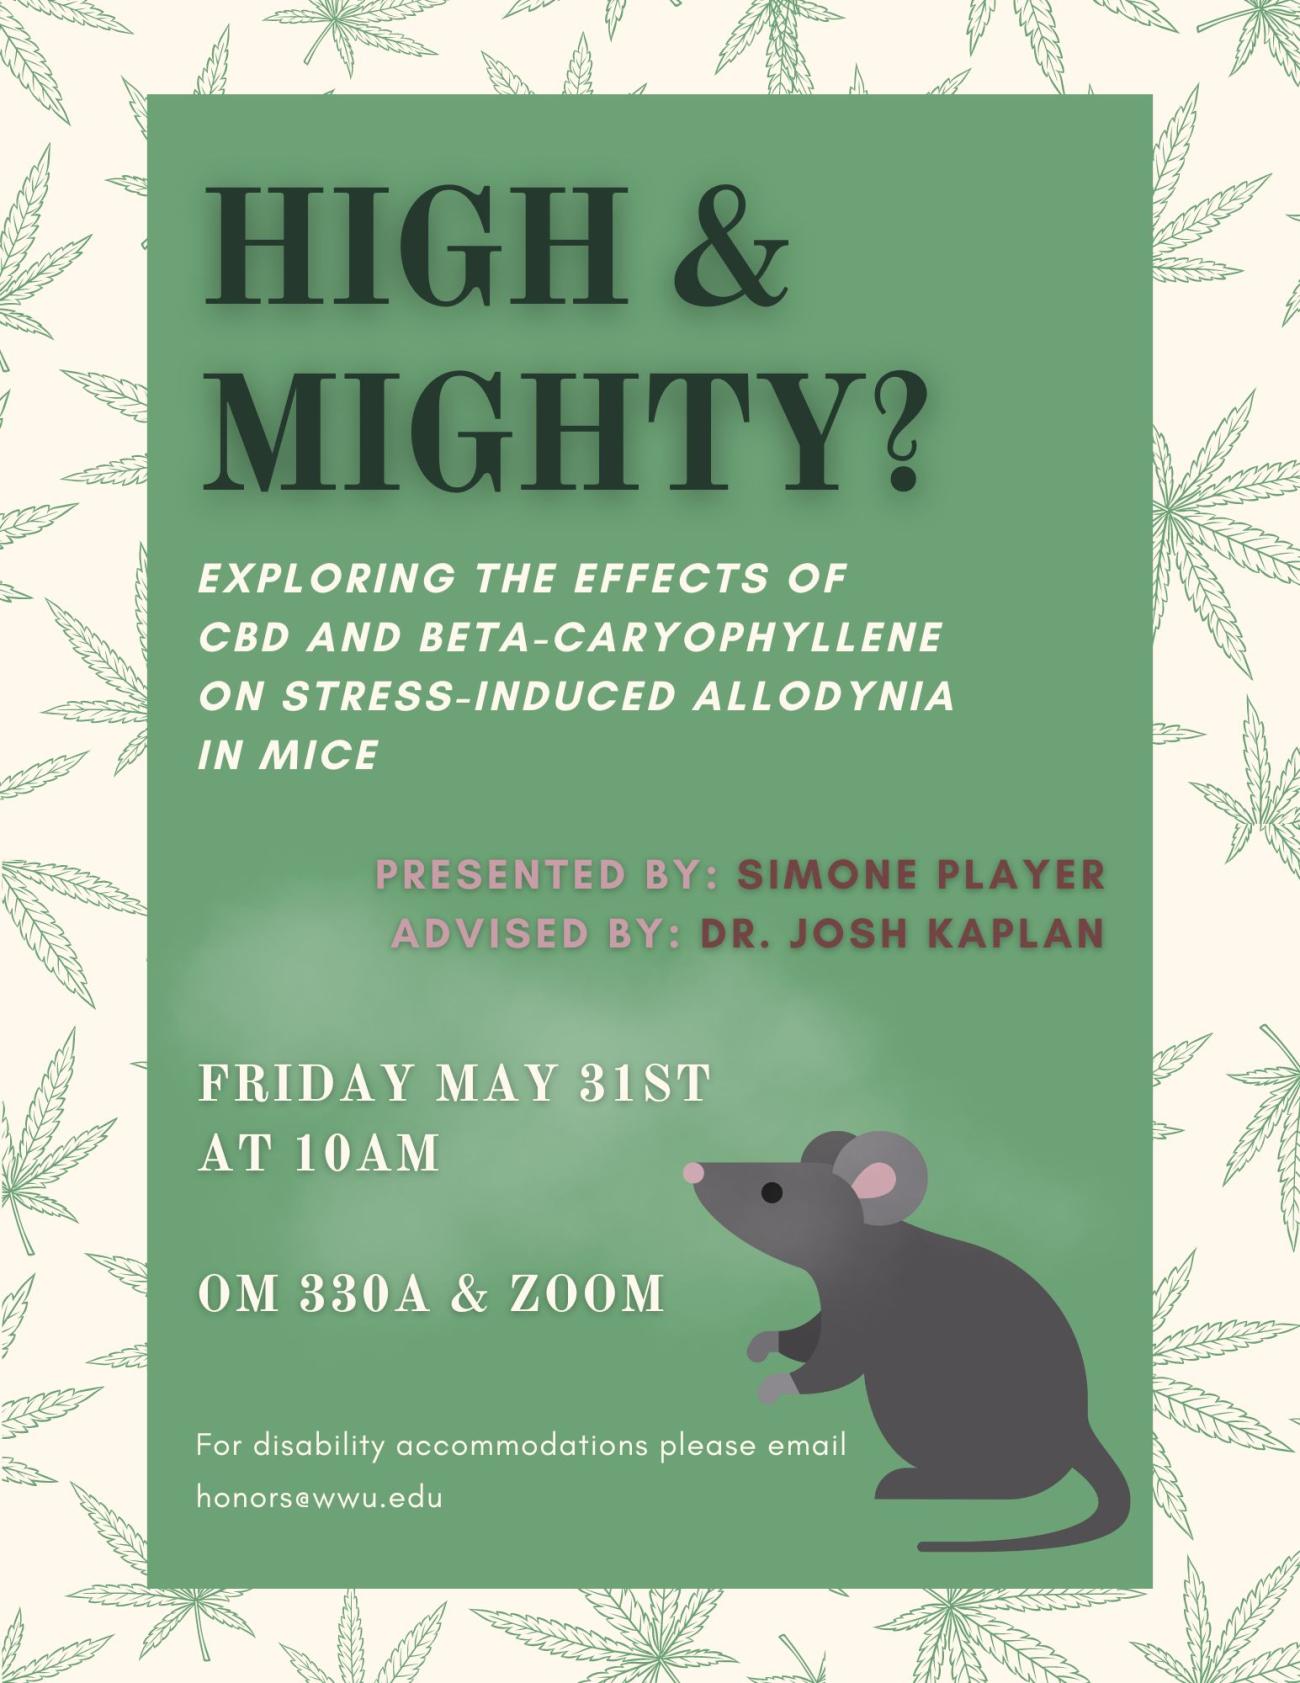 Alt Text: A green and white poster with cannabis leaves in the background. A cartoon mouse is depicted in a haze of smoke. The text reads "High and Mighty? Exploring the effects of CBD and beta-caryophyllene on stress-induced allodynia in mice. Presented by: Simone Player. Advised By: Dr. Josh Kaplan. Friday May 31st at 10am. OM 330A & Zoom. For disability accommodations, please email honors@wwu.edu”.